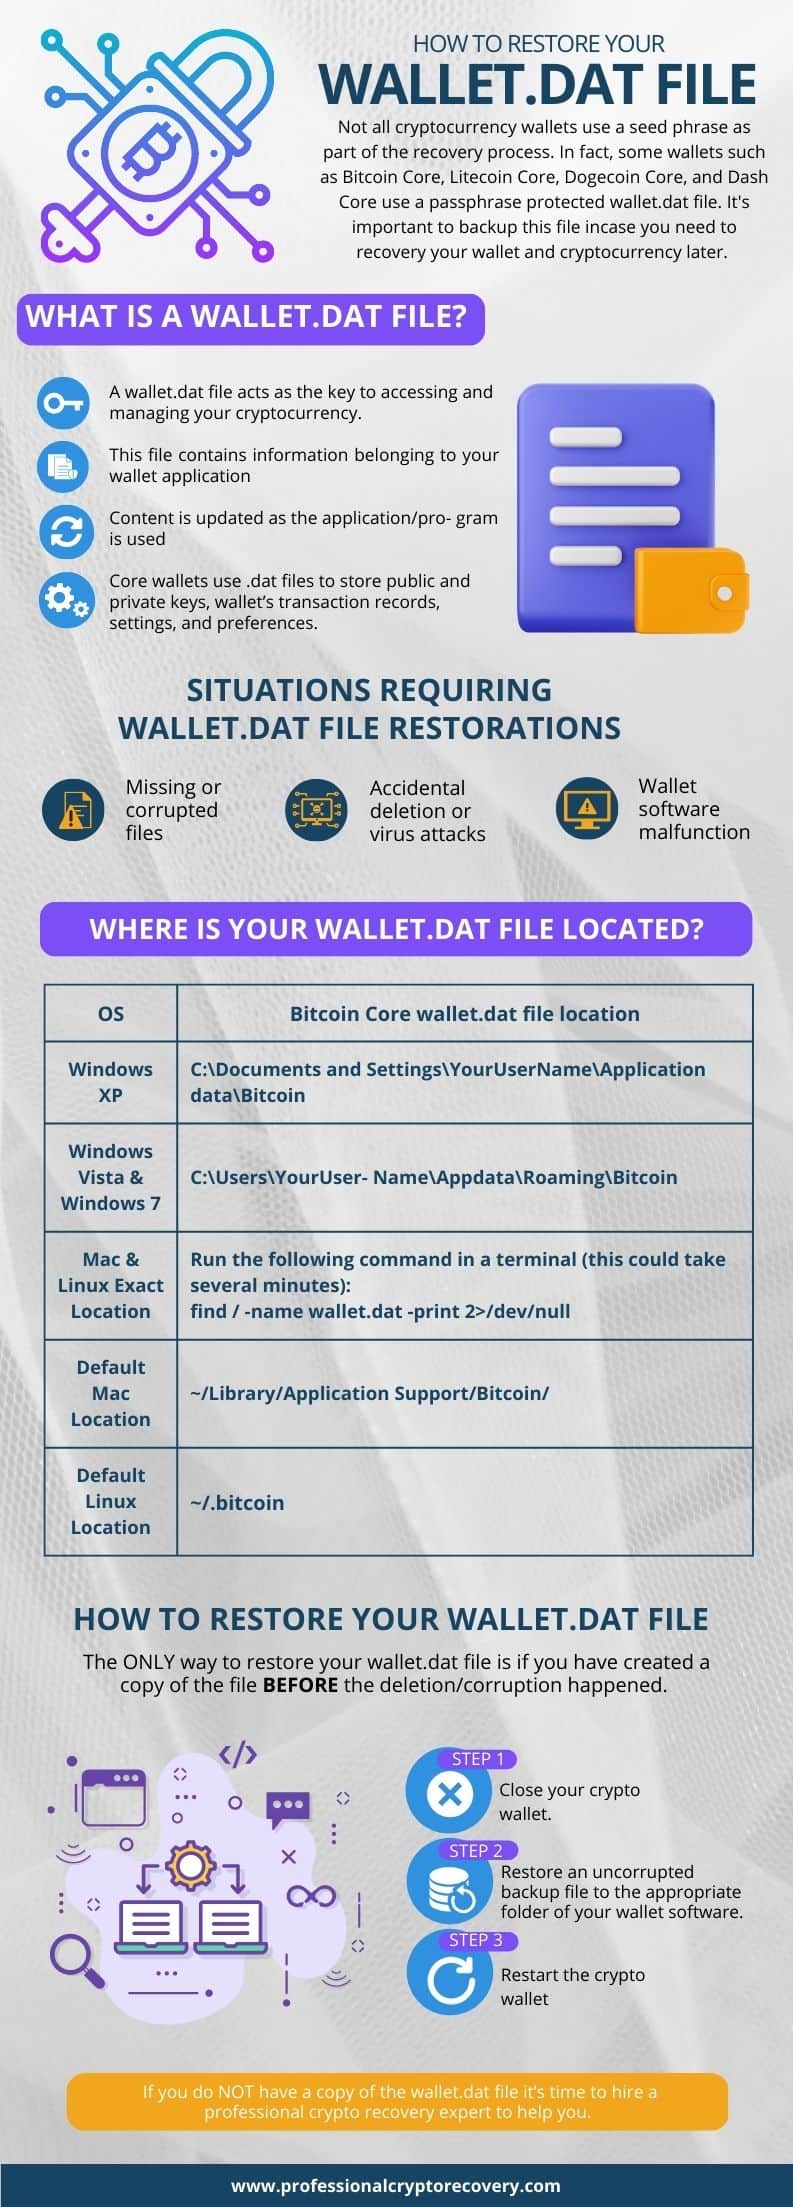 How to restore your wallet.dat file infographic